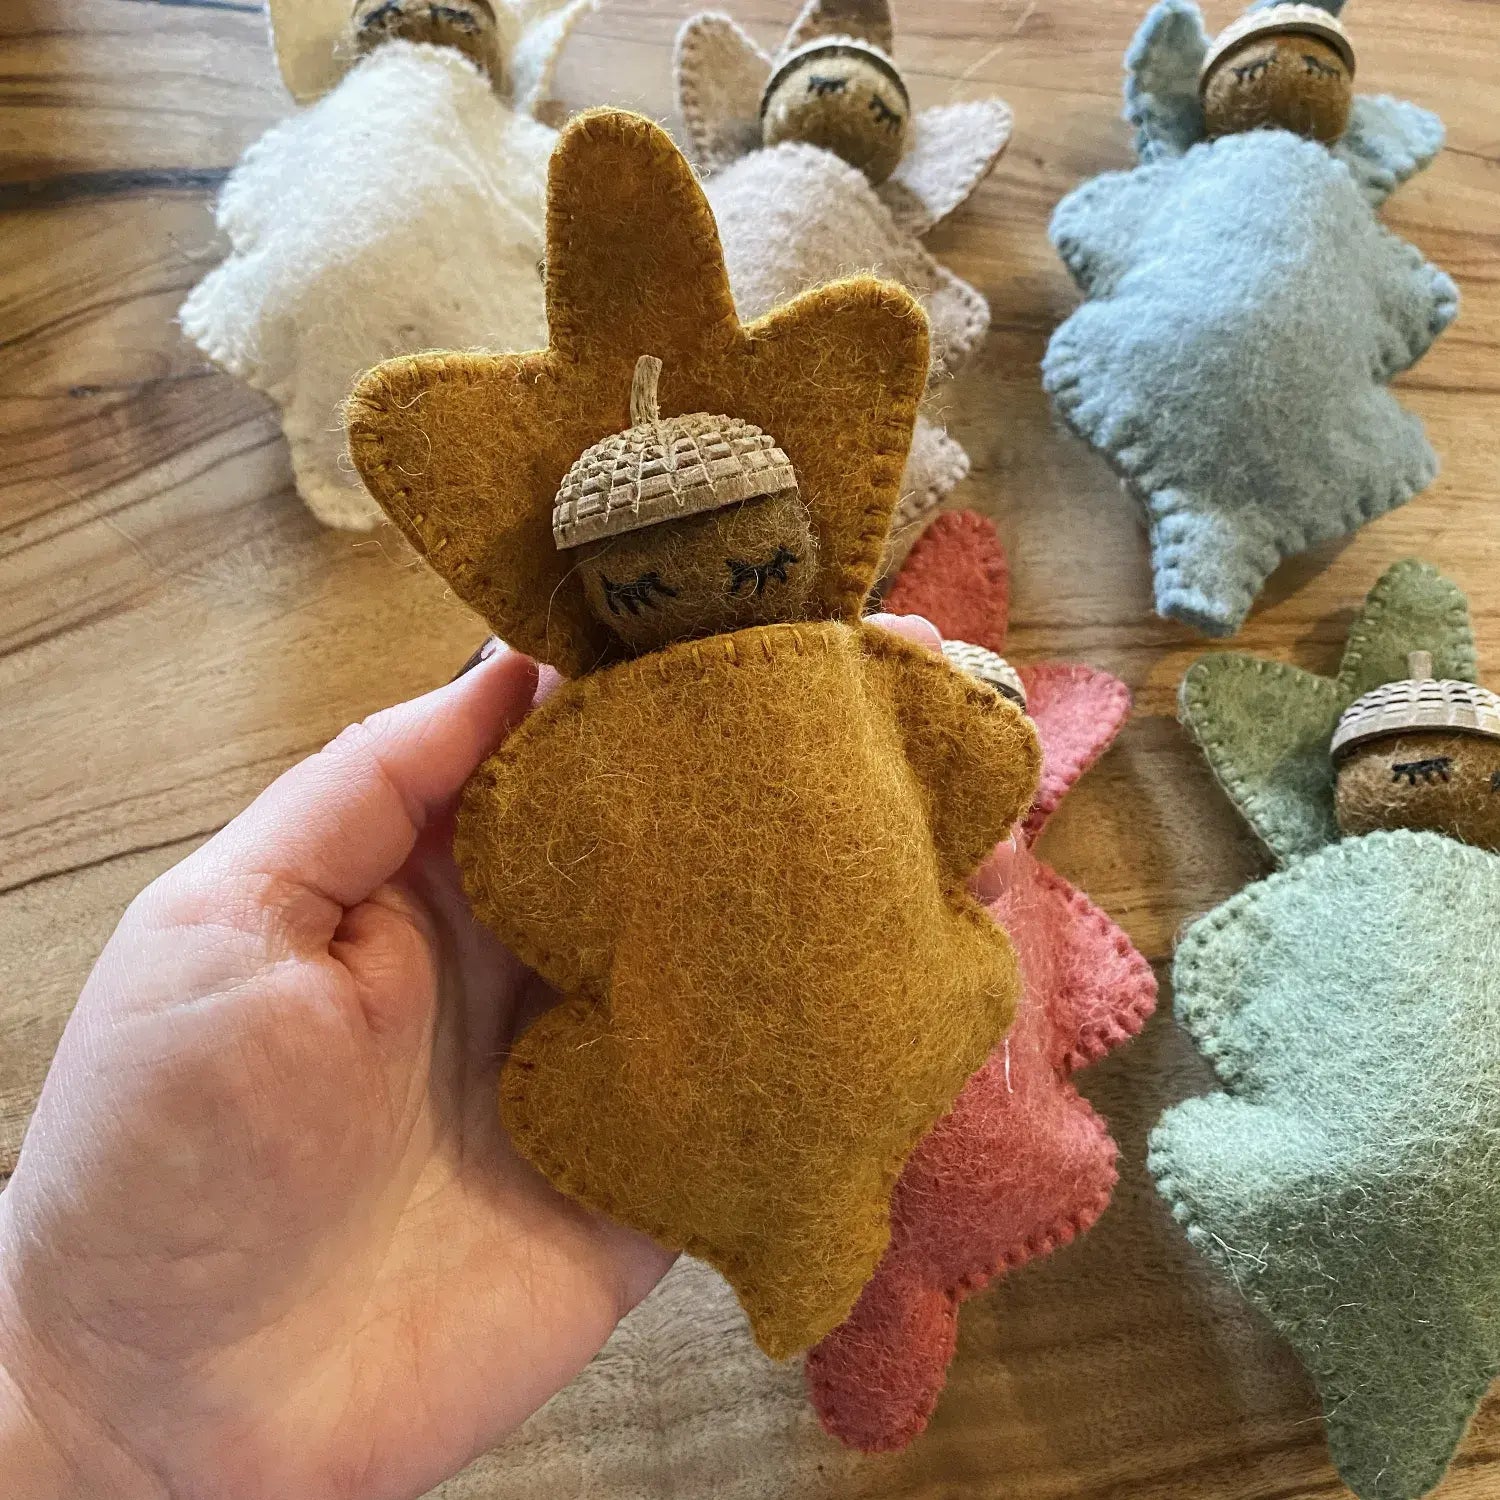 Earth Acorn Babies by Papoose ToysEarth Acorn Babies - Felt Worry Dolls by Papoose Toys